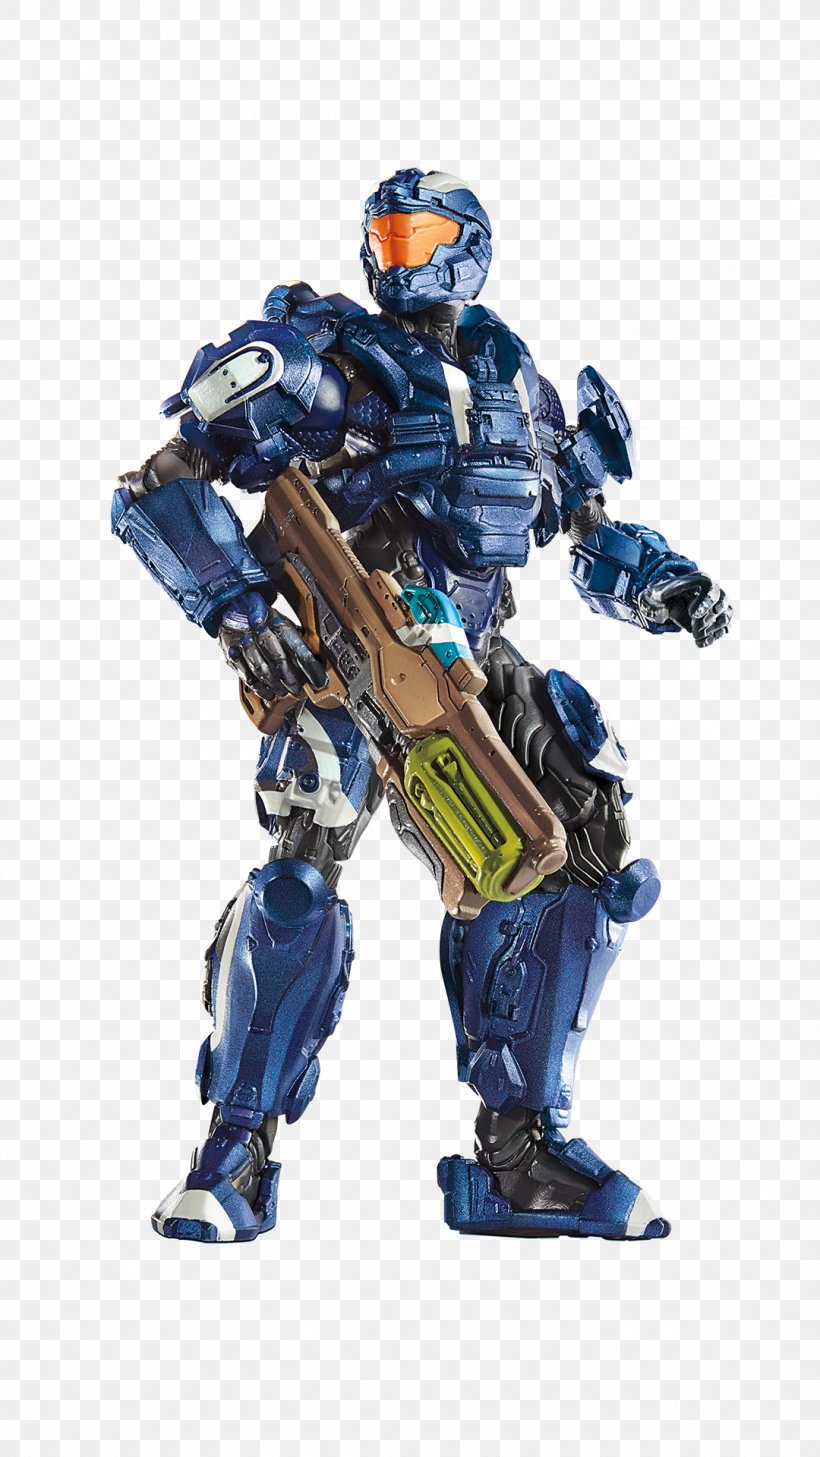 Halo: Spartan Assault Master Chief Halo: Reach Halo 5: Guardians Halo 4, PNG, 1080x1920px, 343 Industries, Halo Spartan Assault, Action Figure, Action Toy Figures, Covenant Download Free